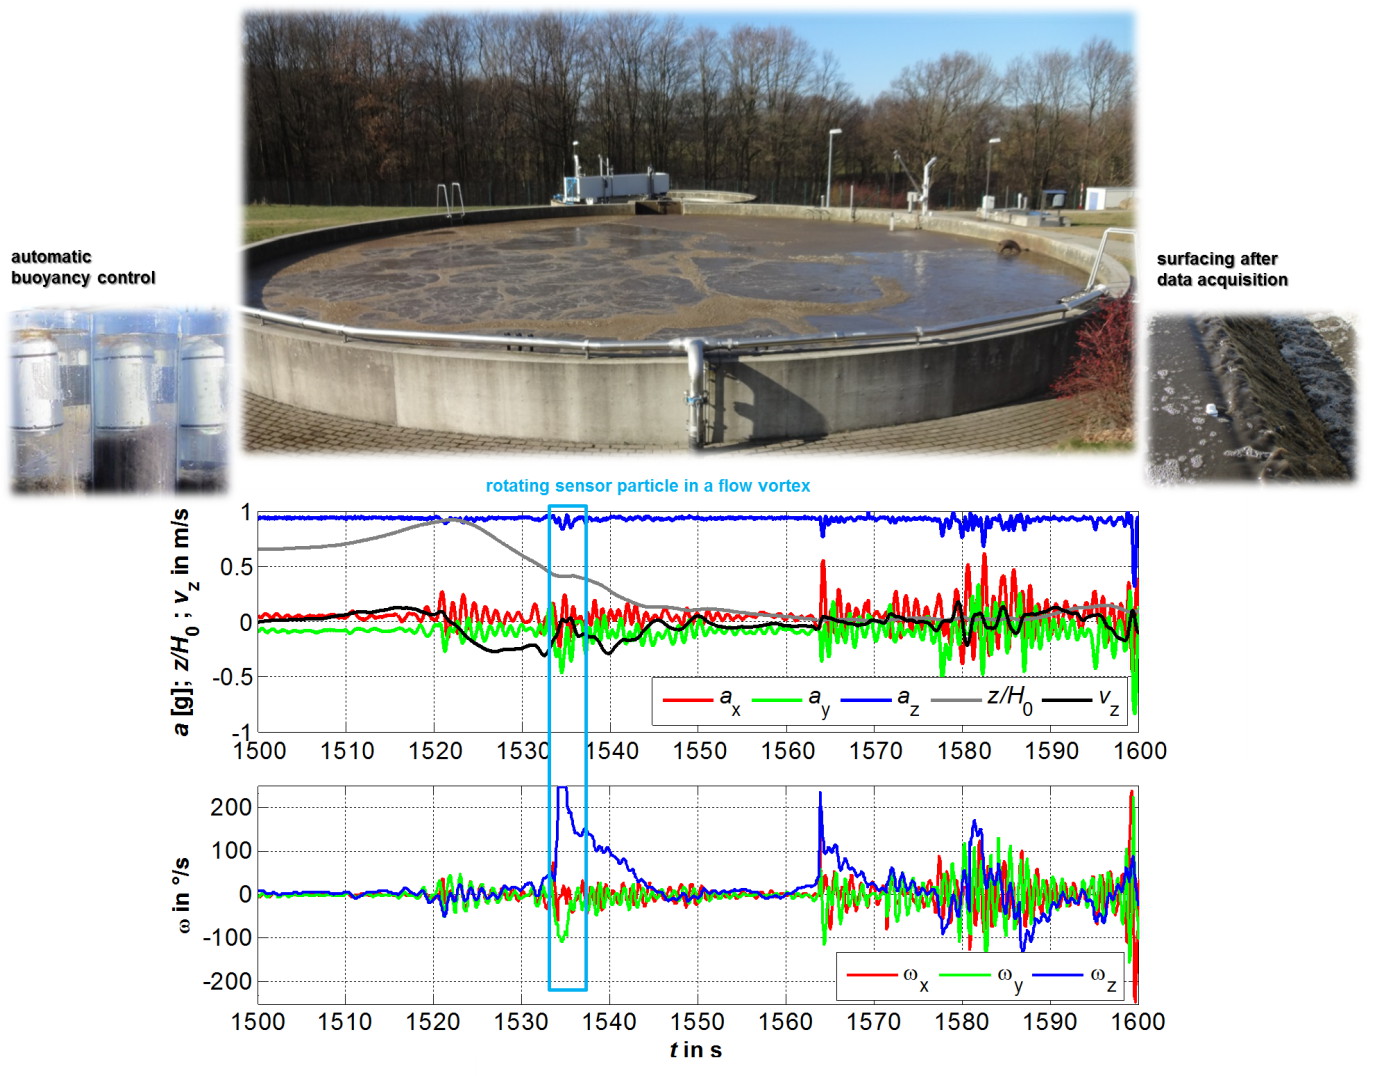 Application of sensor particles in an activated sludge basin of a waste water treatment plant